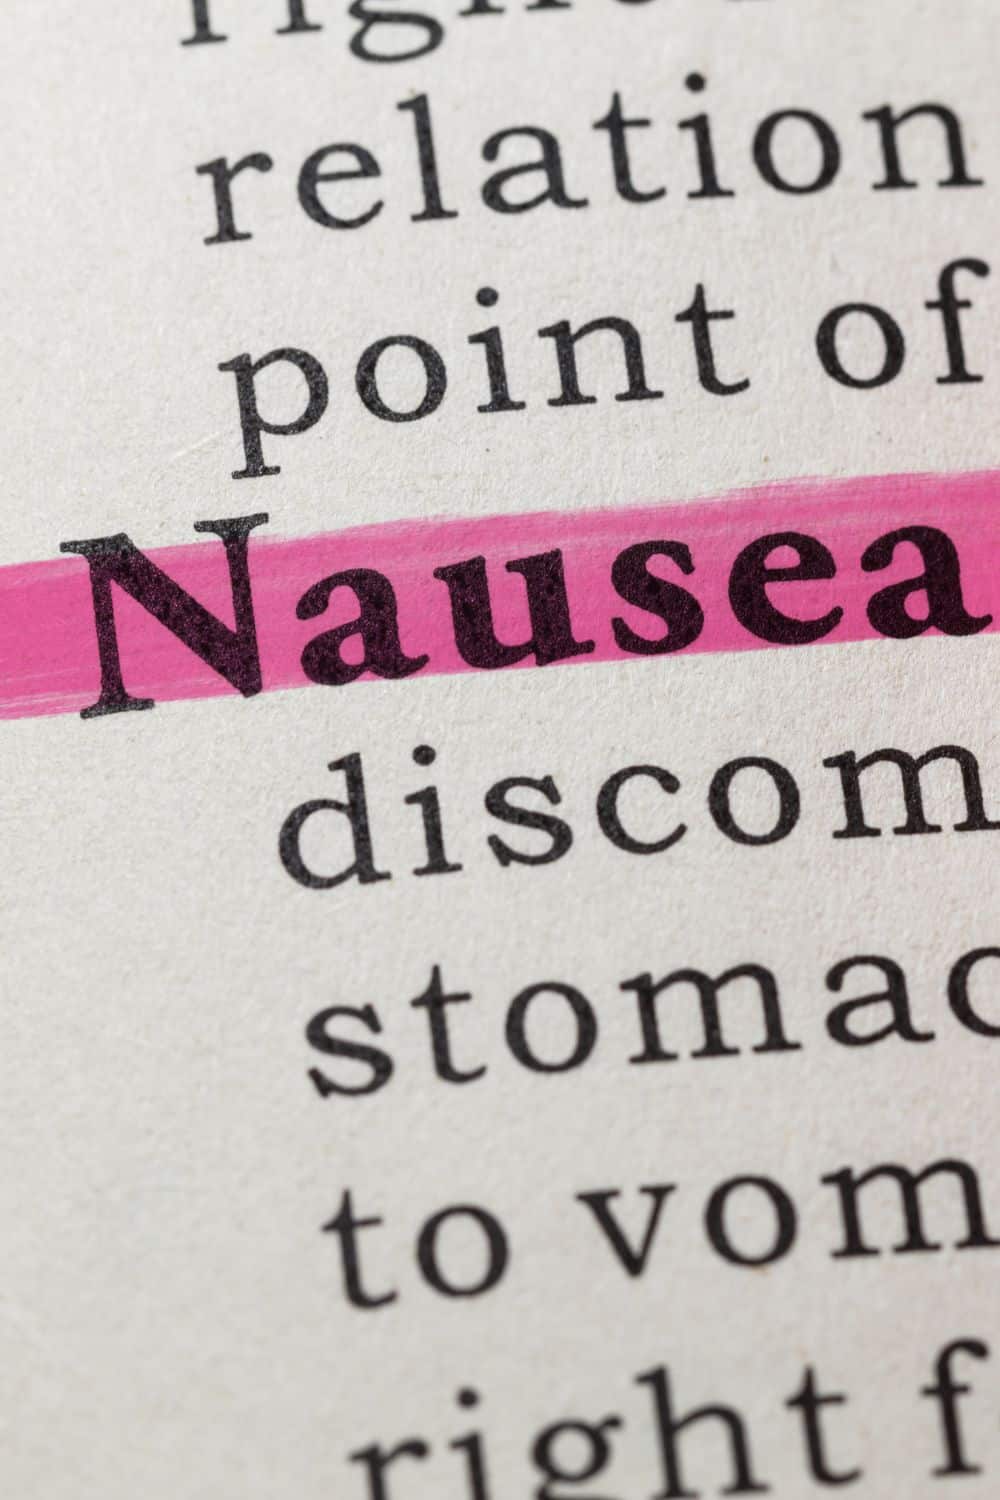 Highlighted pink text of the word "nausea" in a textbook